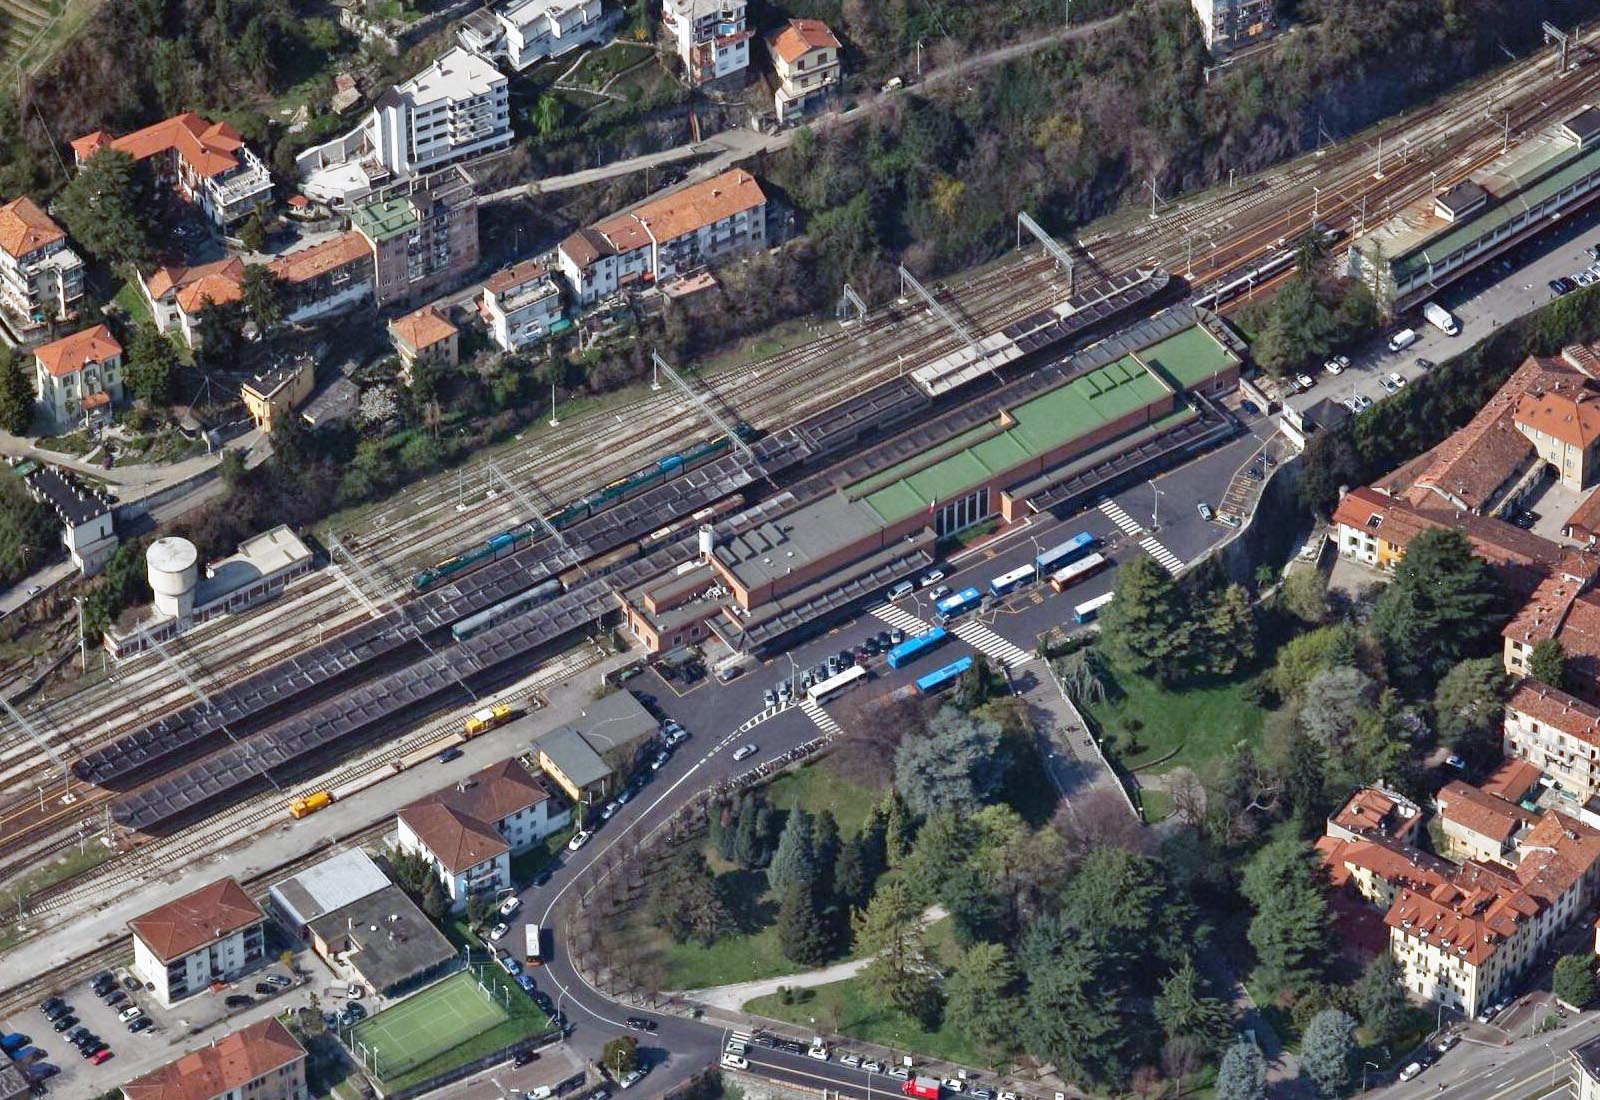 Extinguishing systems of railway stations - The Como railway station